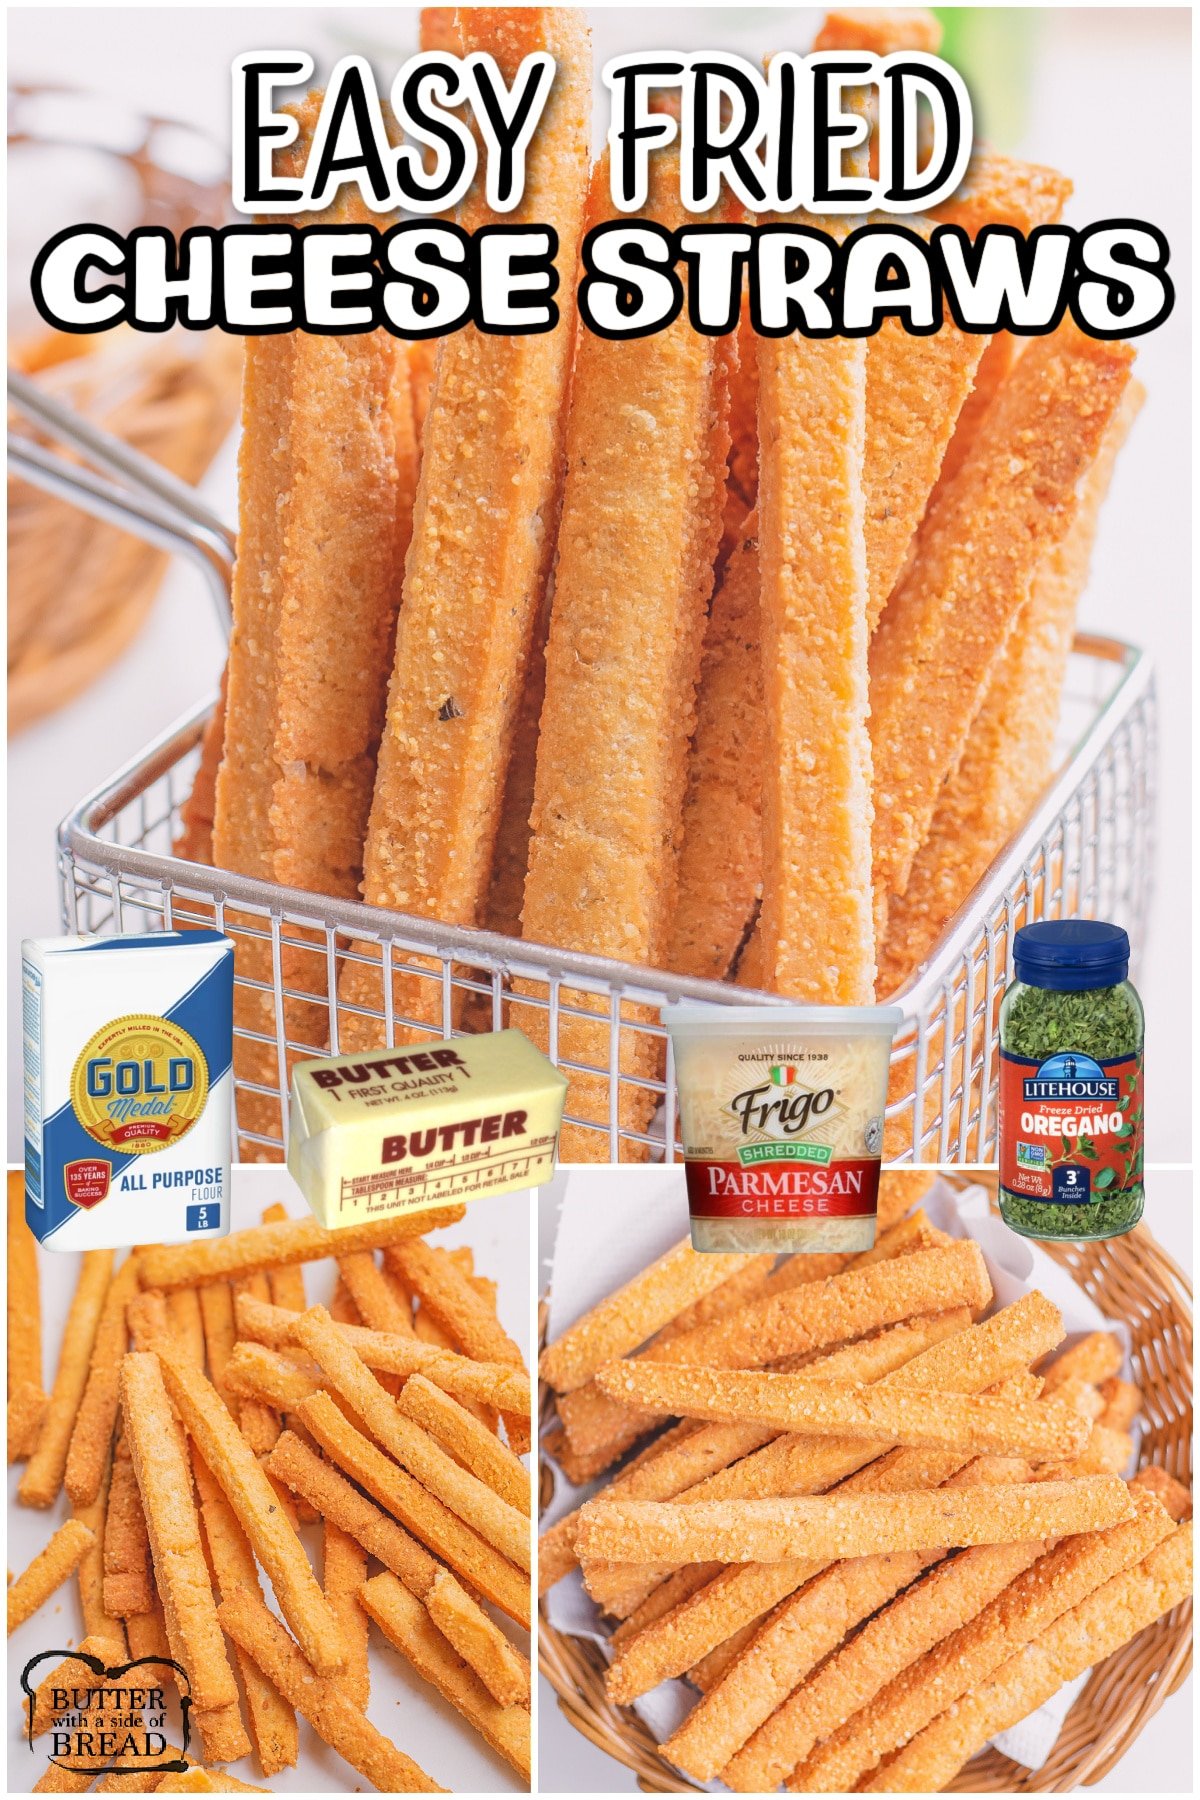 Easy Fried Cheese Straws made with flour, butter, Parmesan cheese & Oregano! Simple Cheese Straws are the perfect side dish for salads & pasta as everyone loves them!